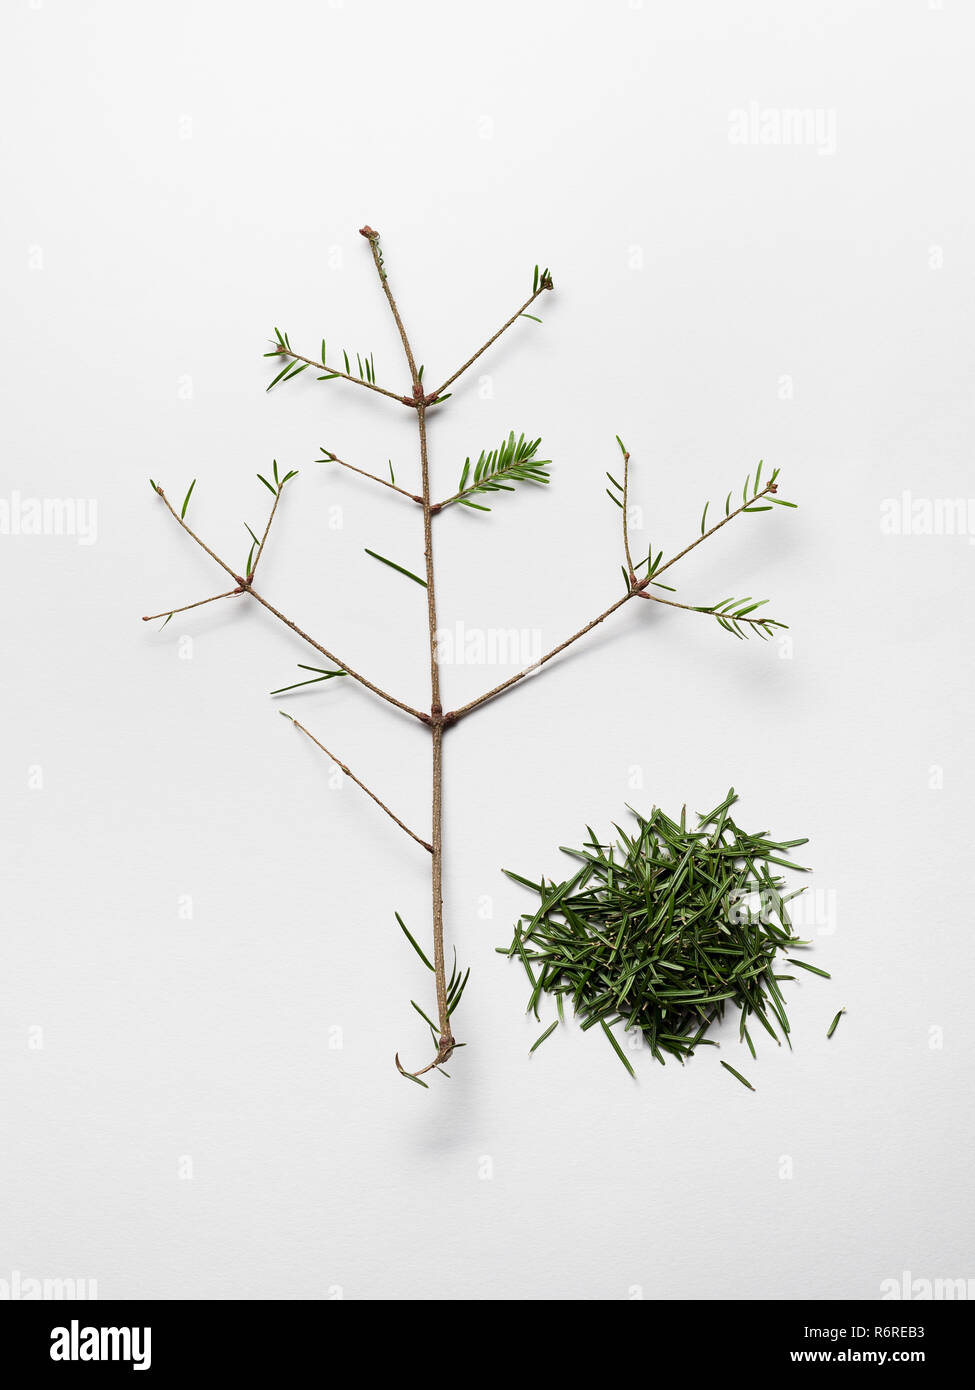 Christmas Break Is Over. Fallen spruce needles on white background. Flat lay, top view Stock Photo